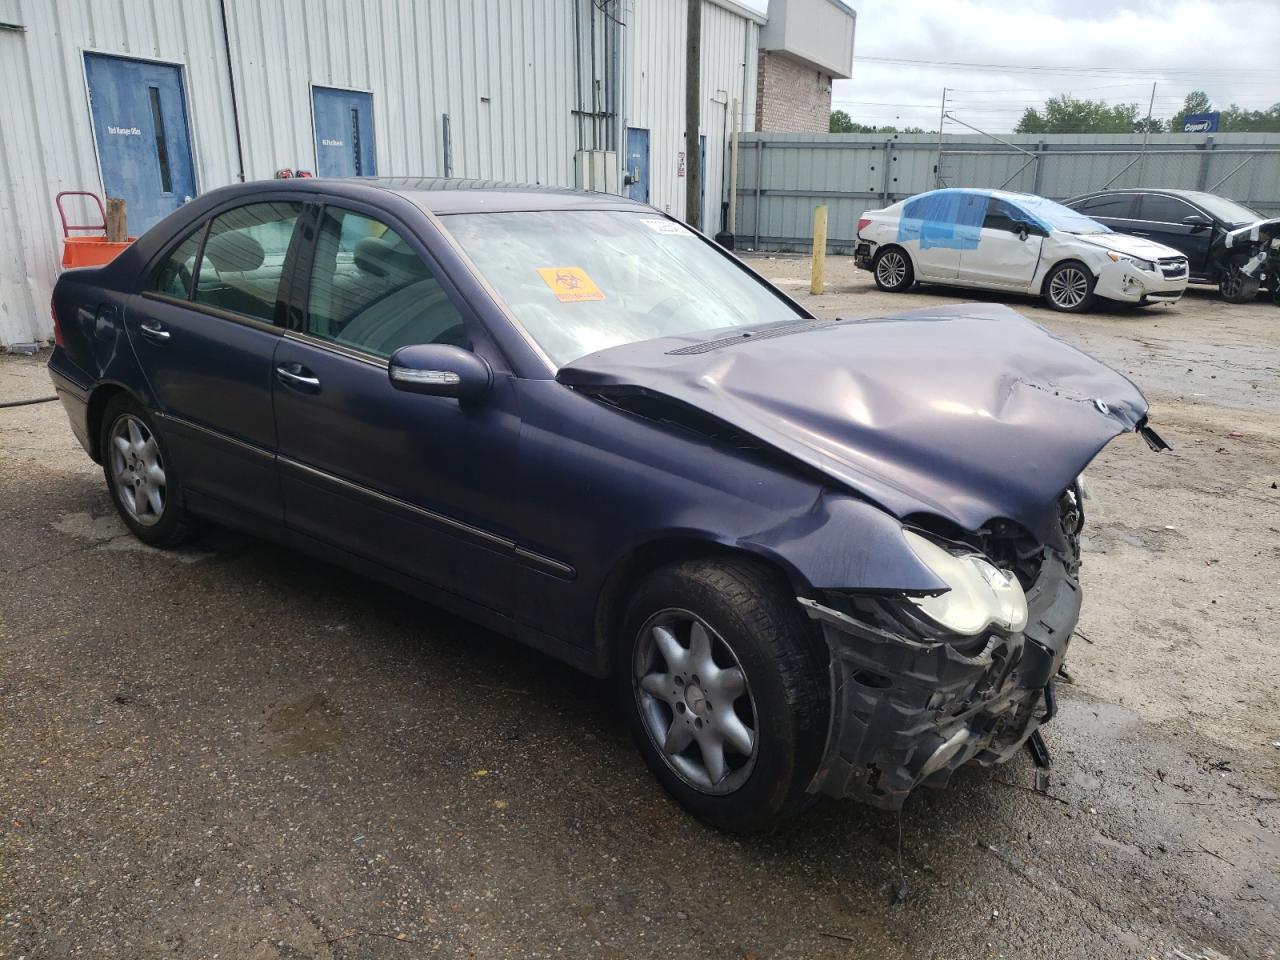 WDBRF54H76A****** Salvage and Wrecked 2006 Mercedes-Benz C-Class in Alabama State